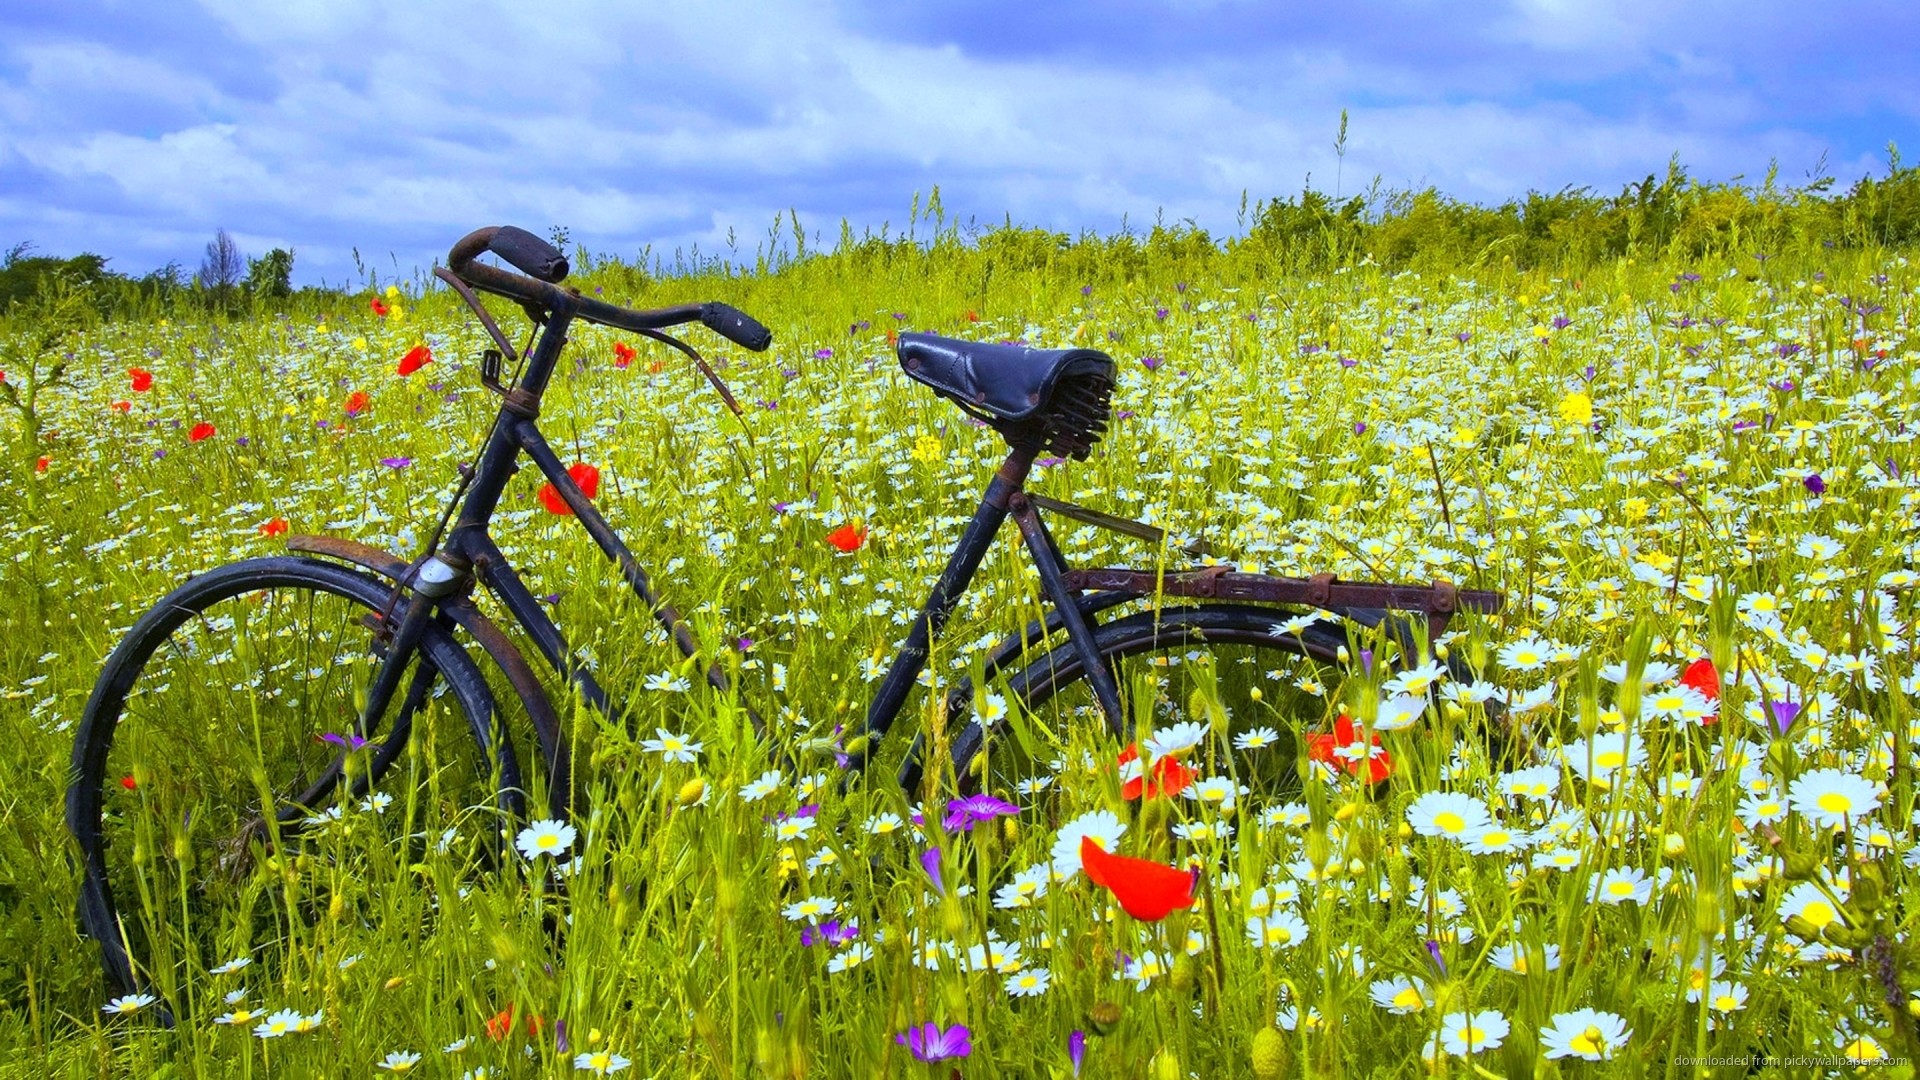 1920x1080 Bicycle In Flower Field Wallpaper picture